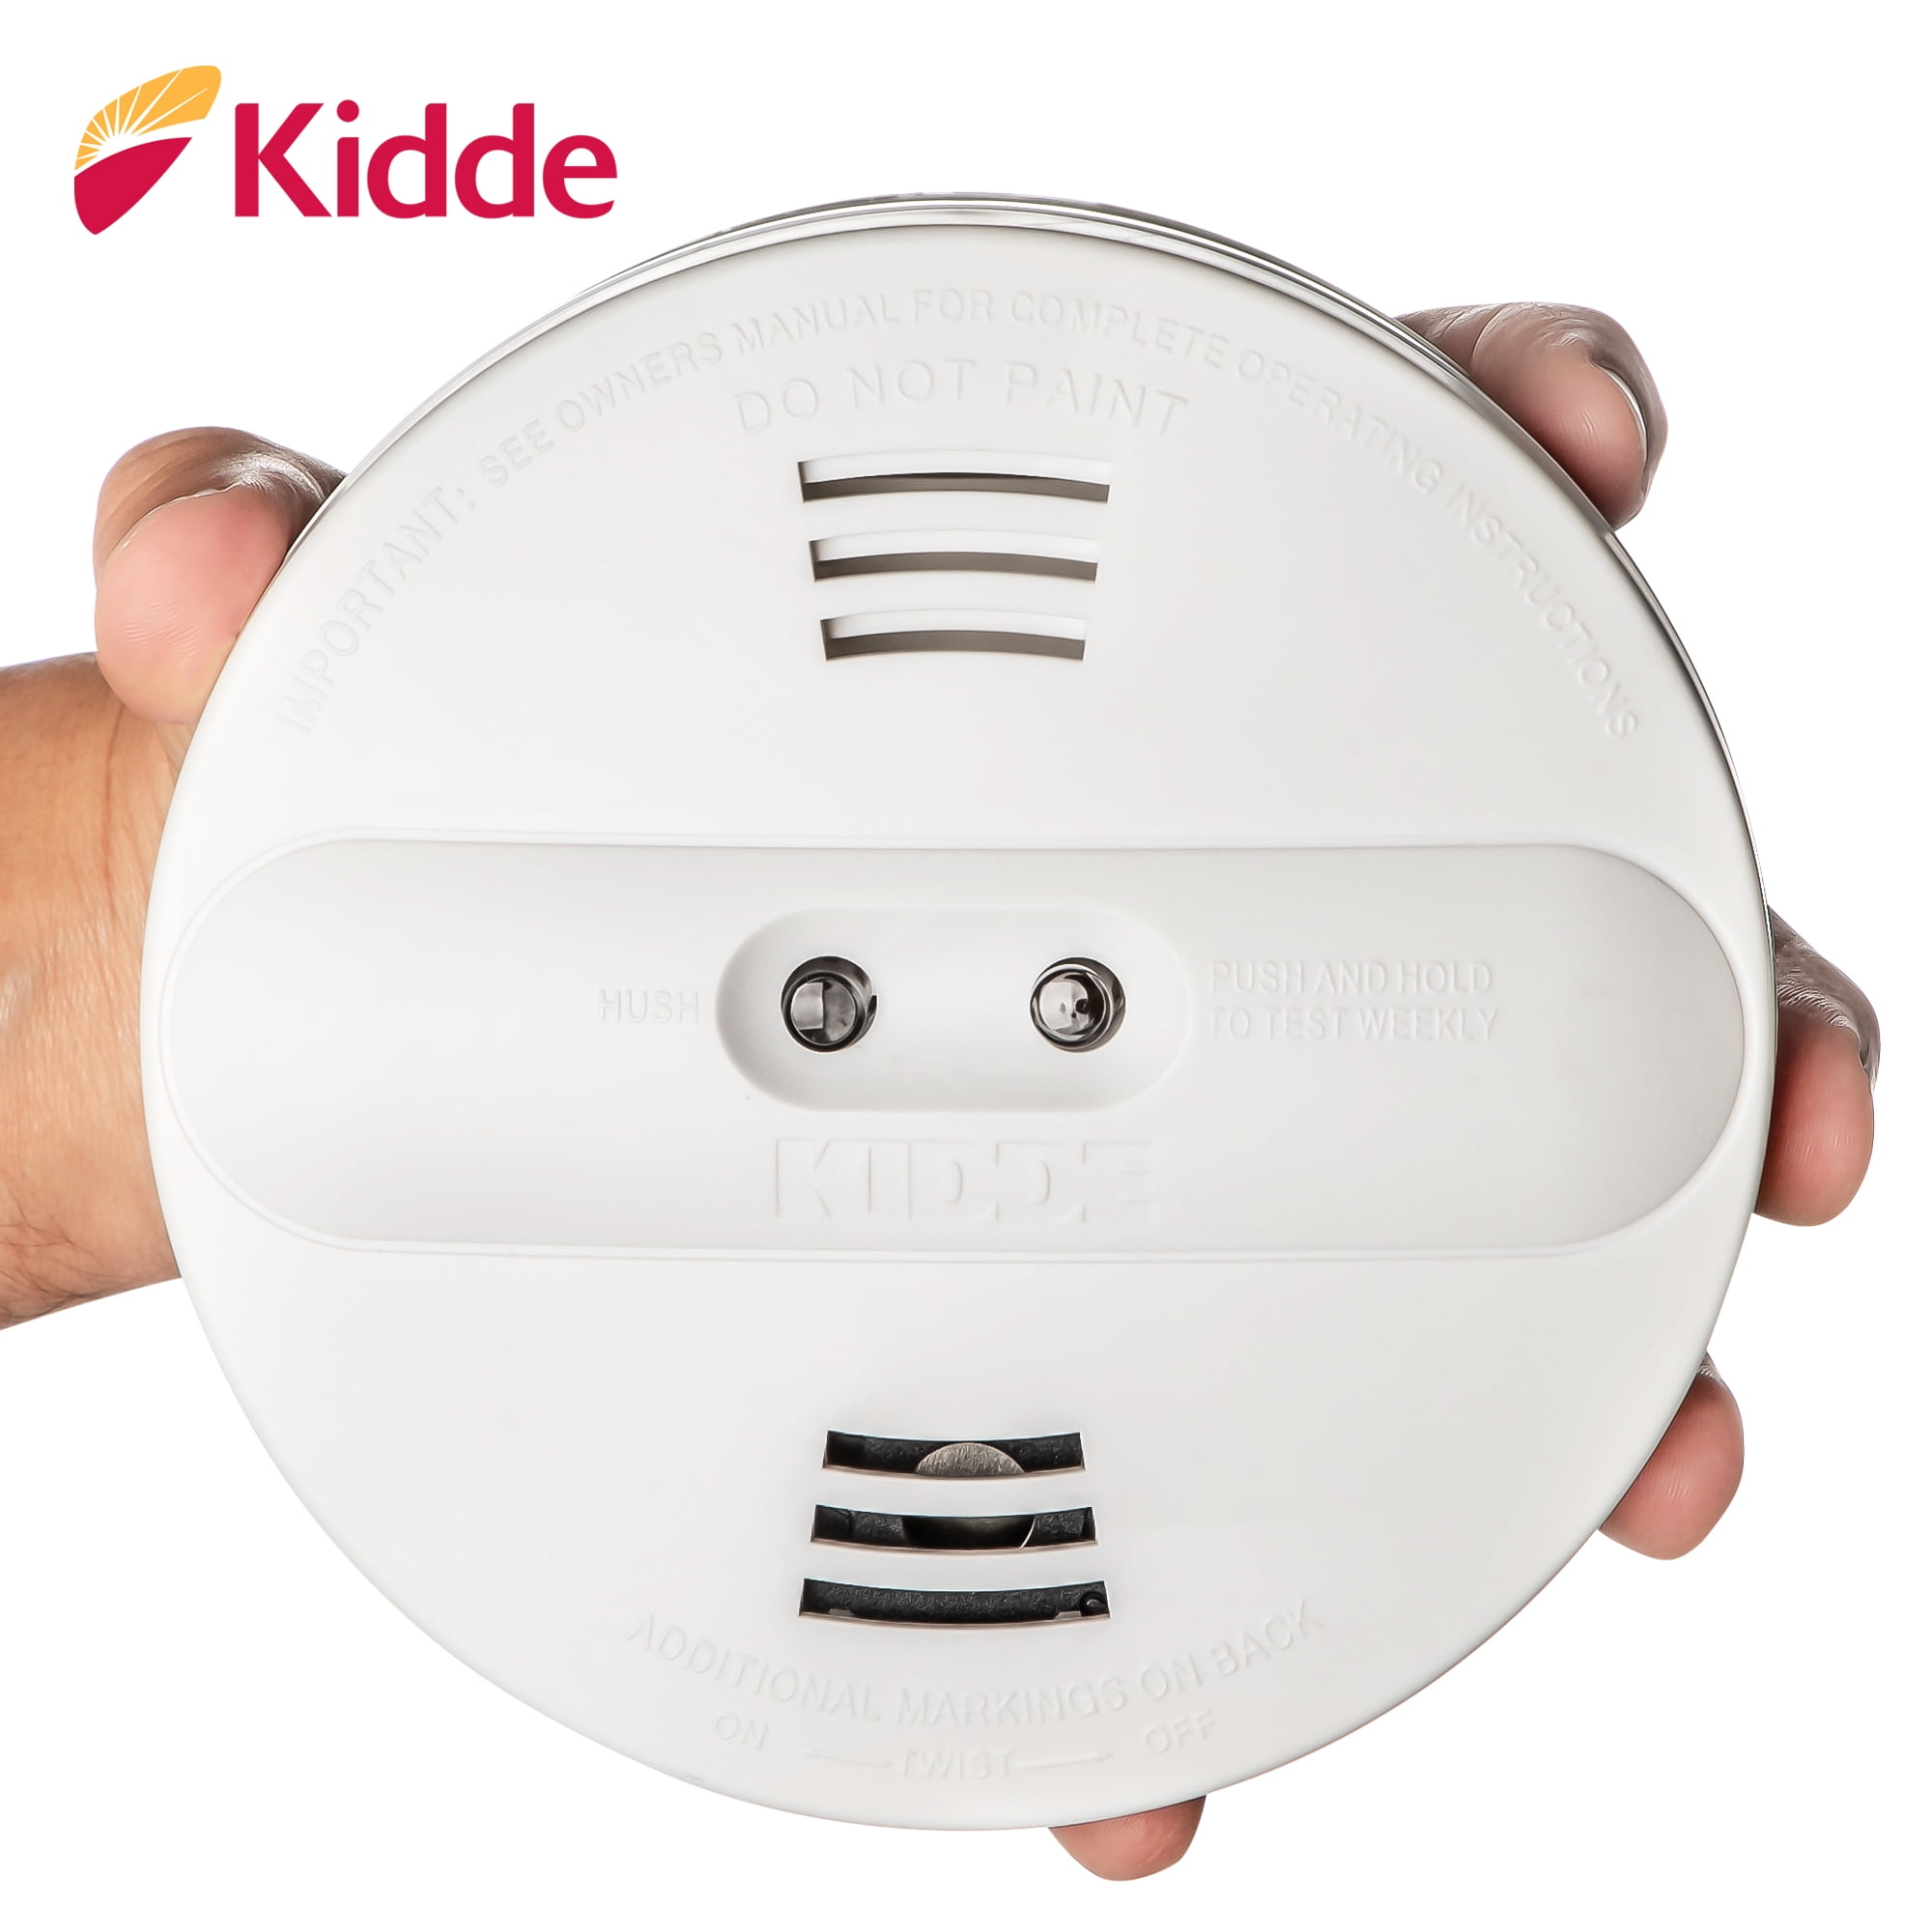 White Smoke Detector Battery Operated W/ Ionization/Photoelectric Dual Sensors